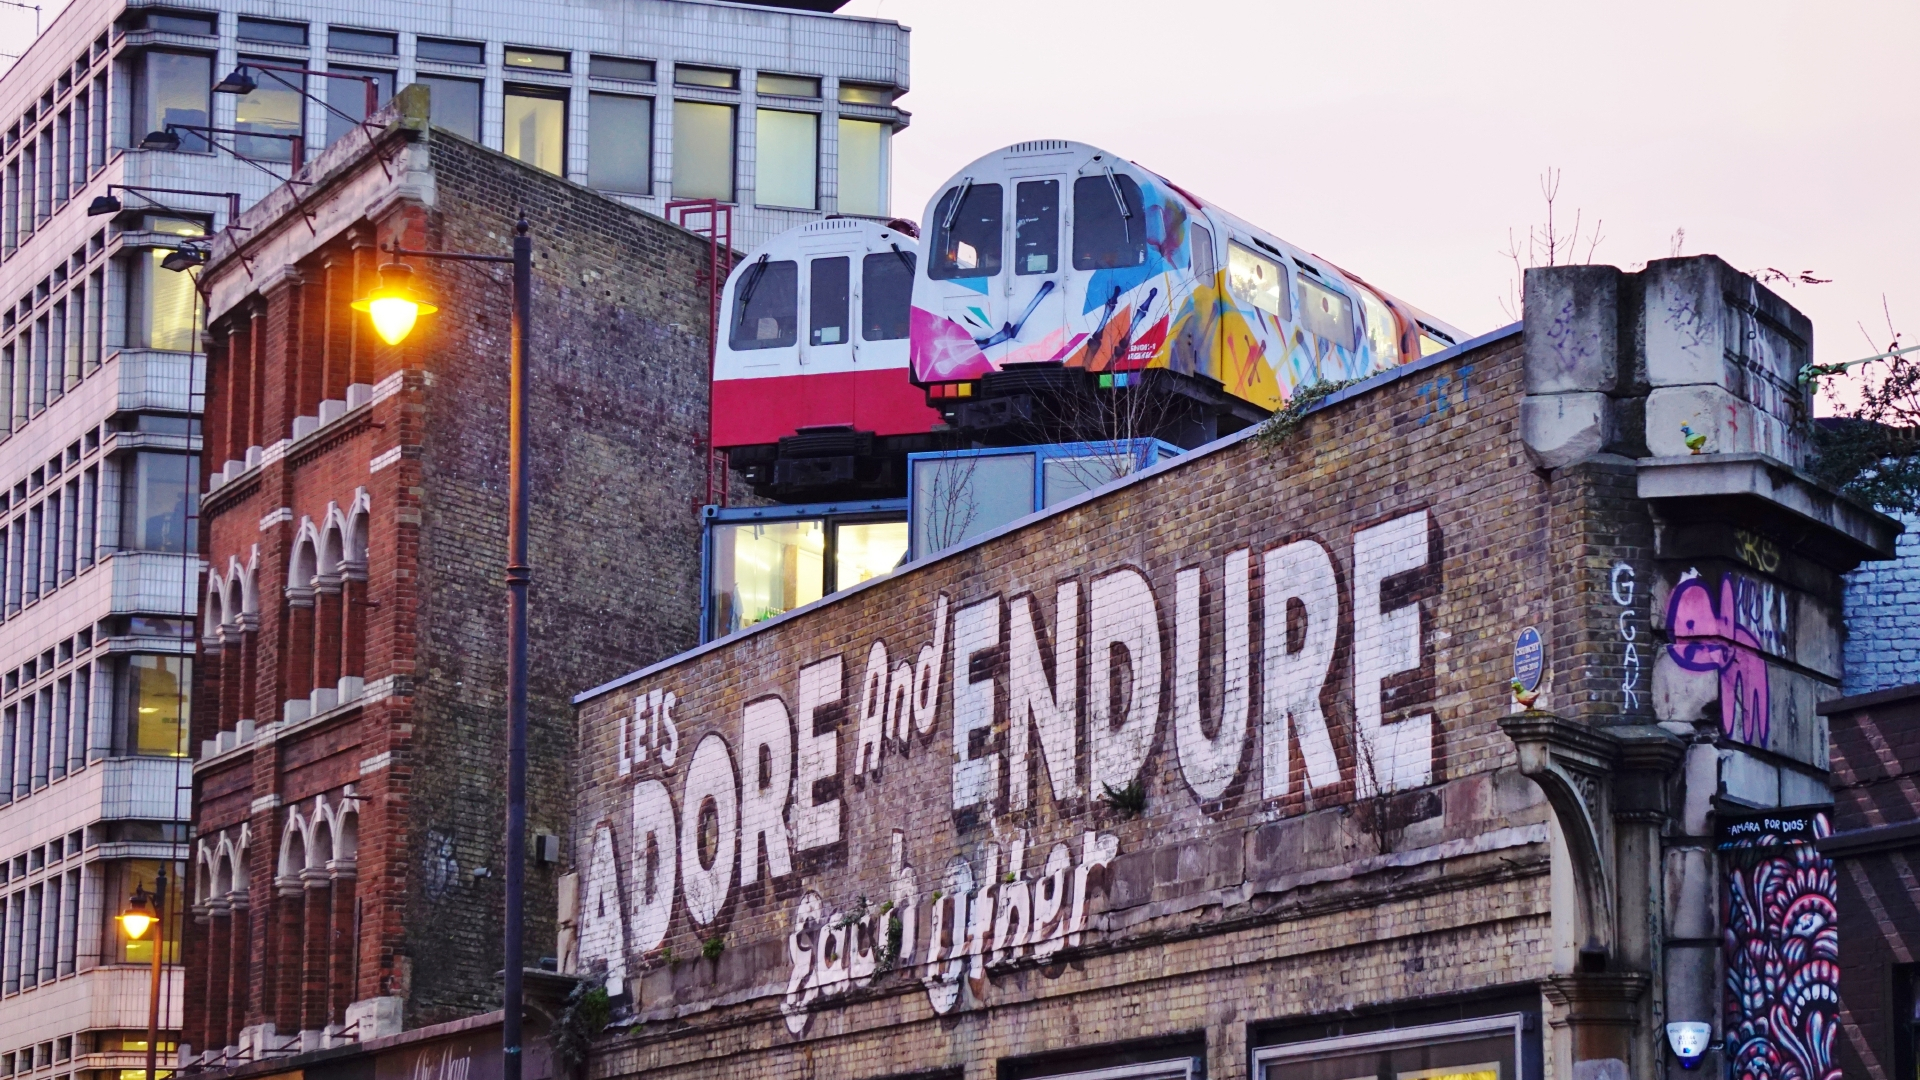 Street art and tube train offices in Shoreditch.